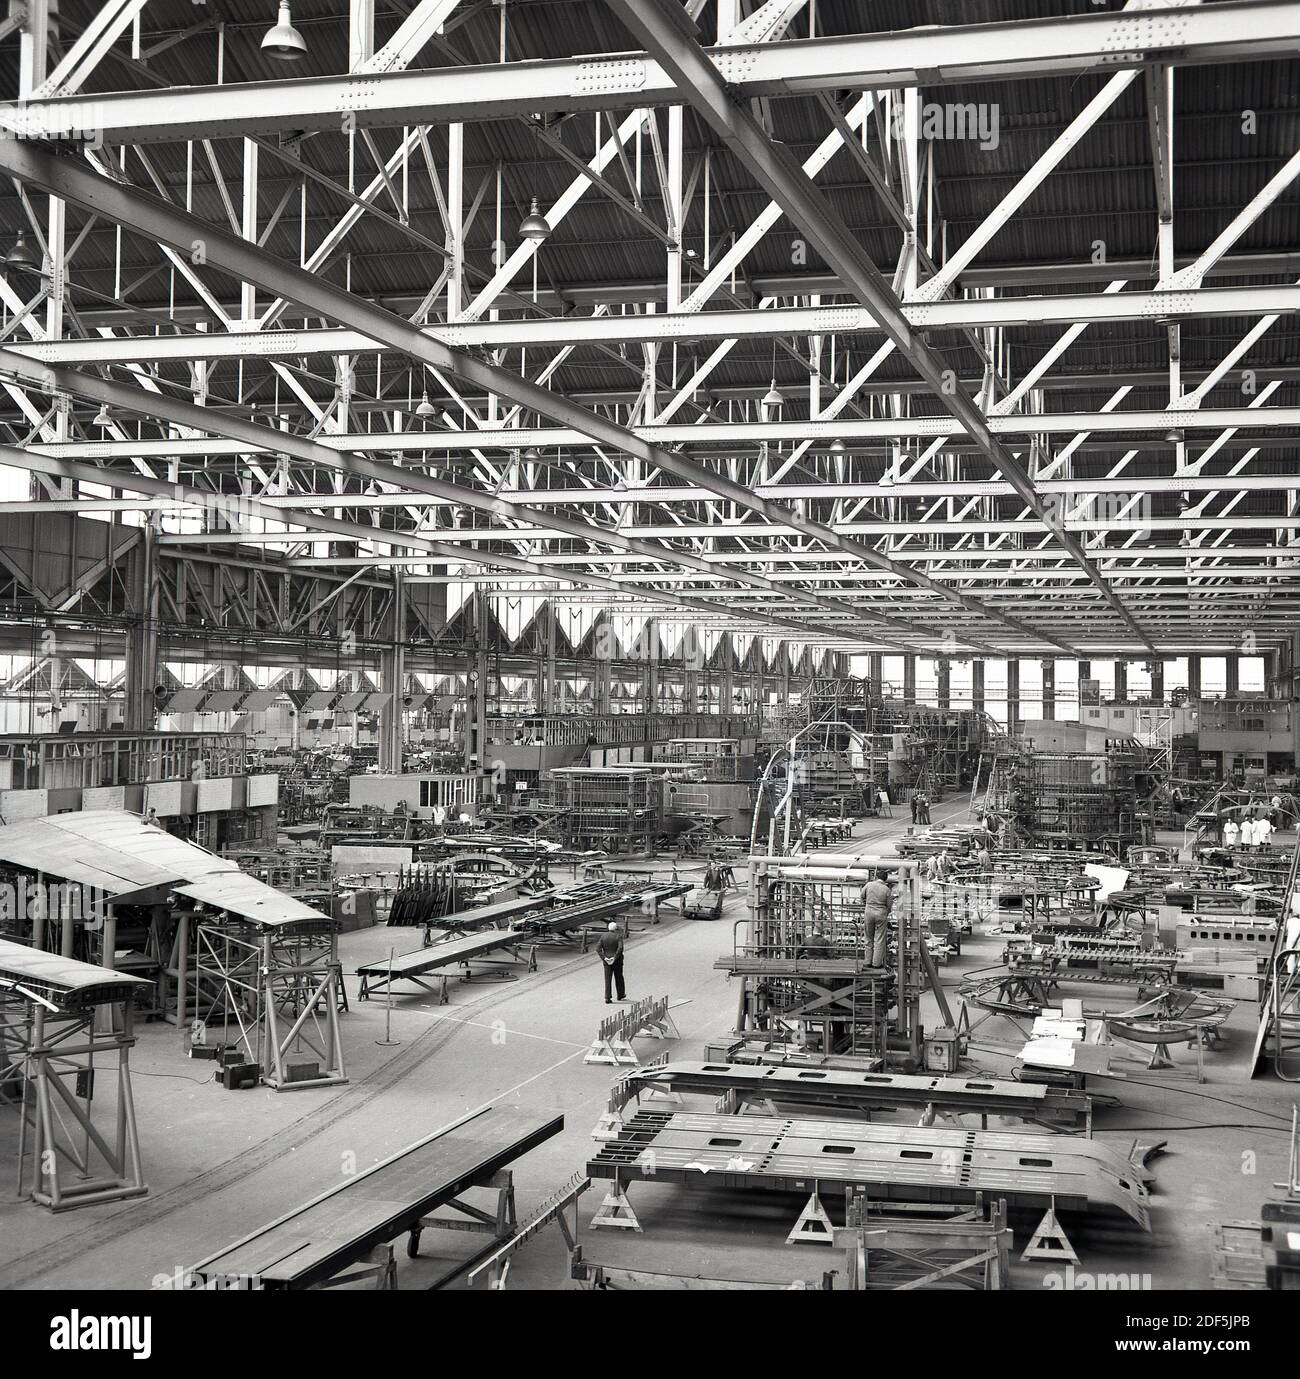 1950s, historical, overhead view inside of a giant aviation hangar showing construction of large passenger aircraft, England, UK. Picture shows the ceiling gantry structure and individual technicans on the floor, working on different sections of the airplane, including the sections of the wing. Stock Photo